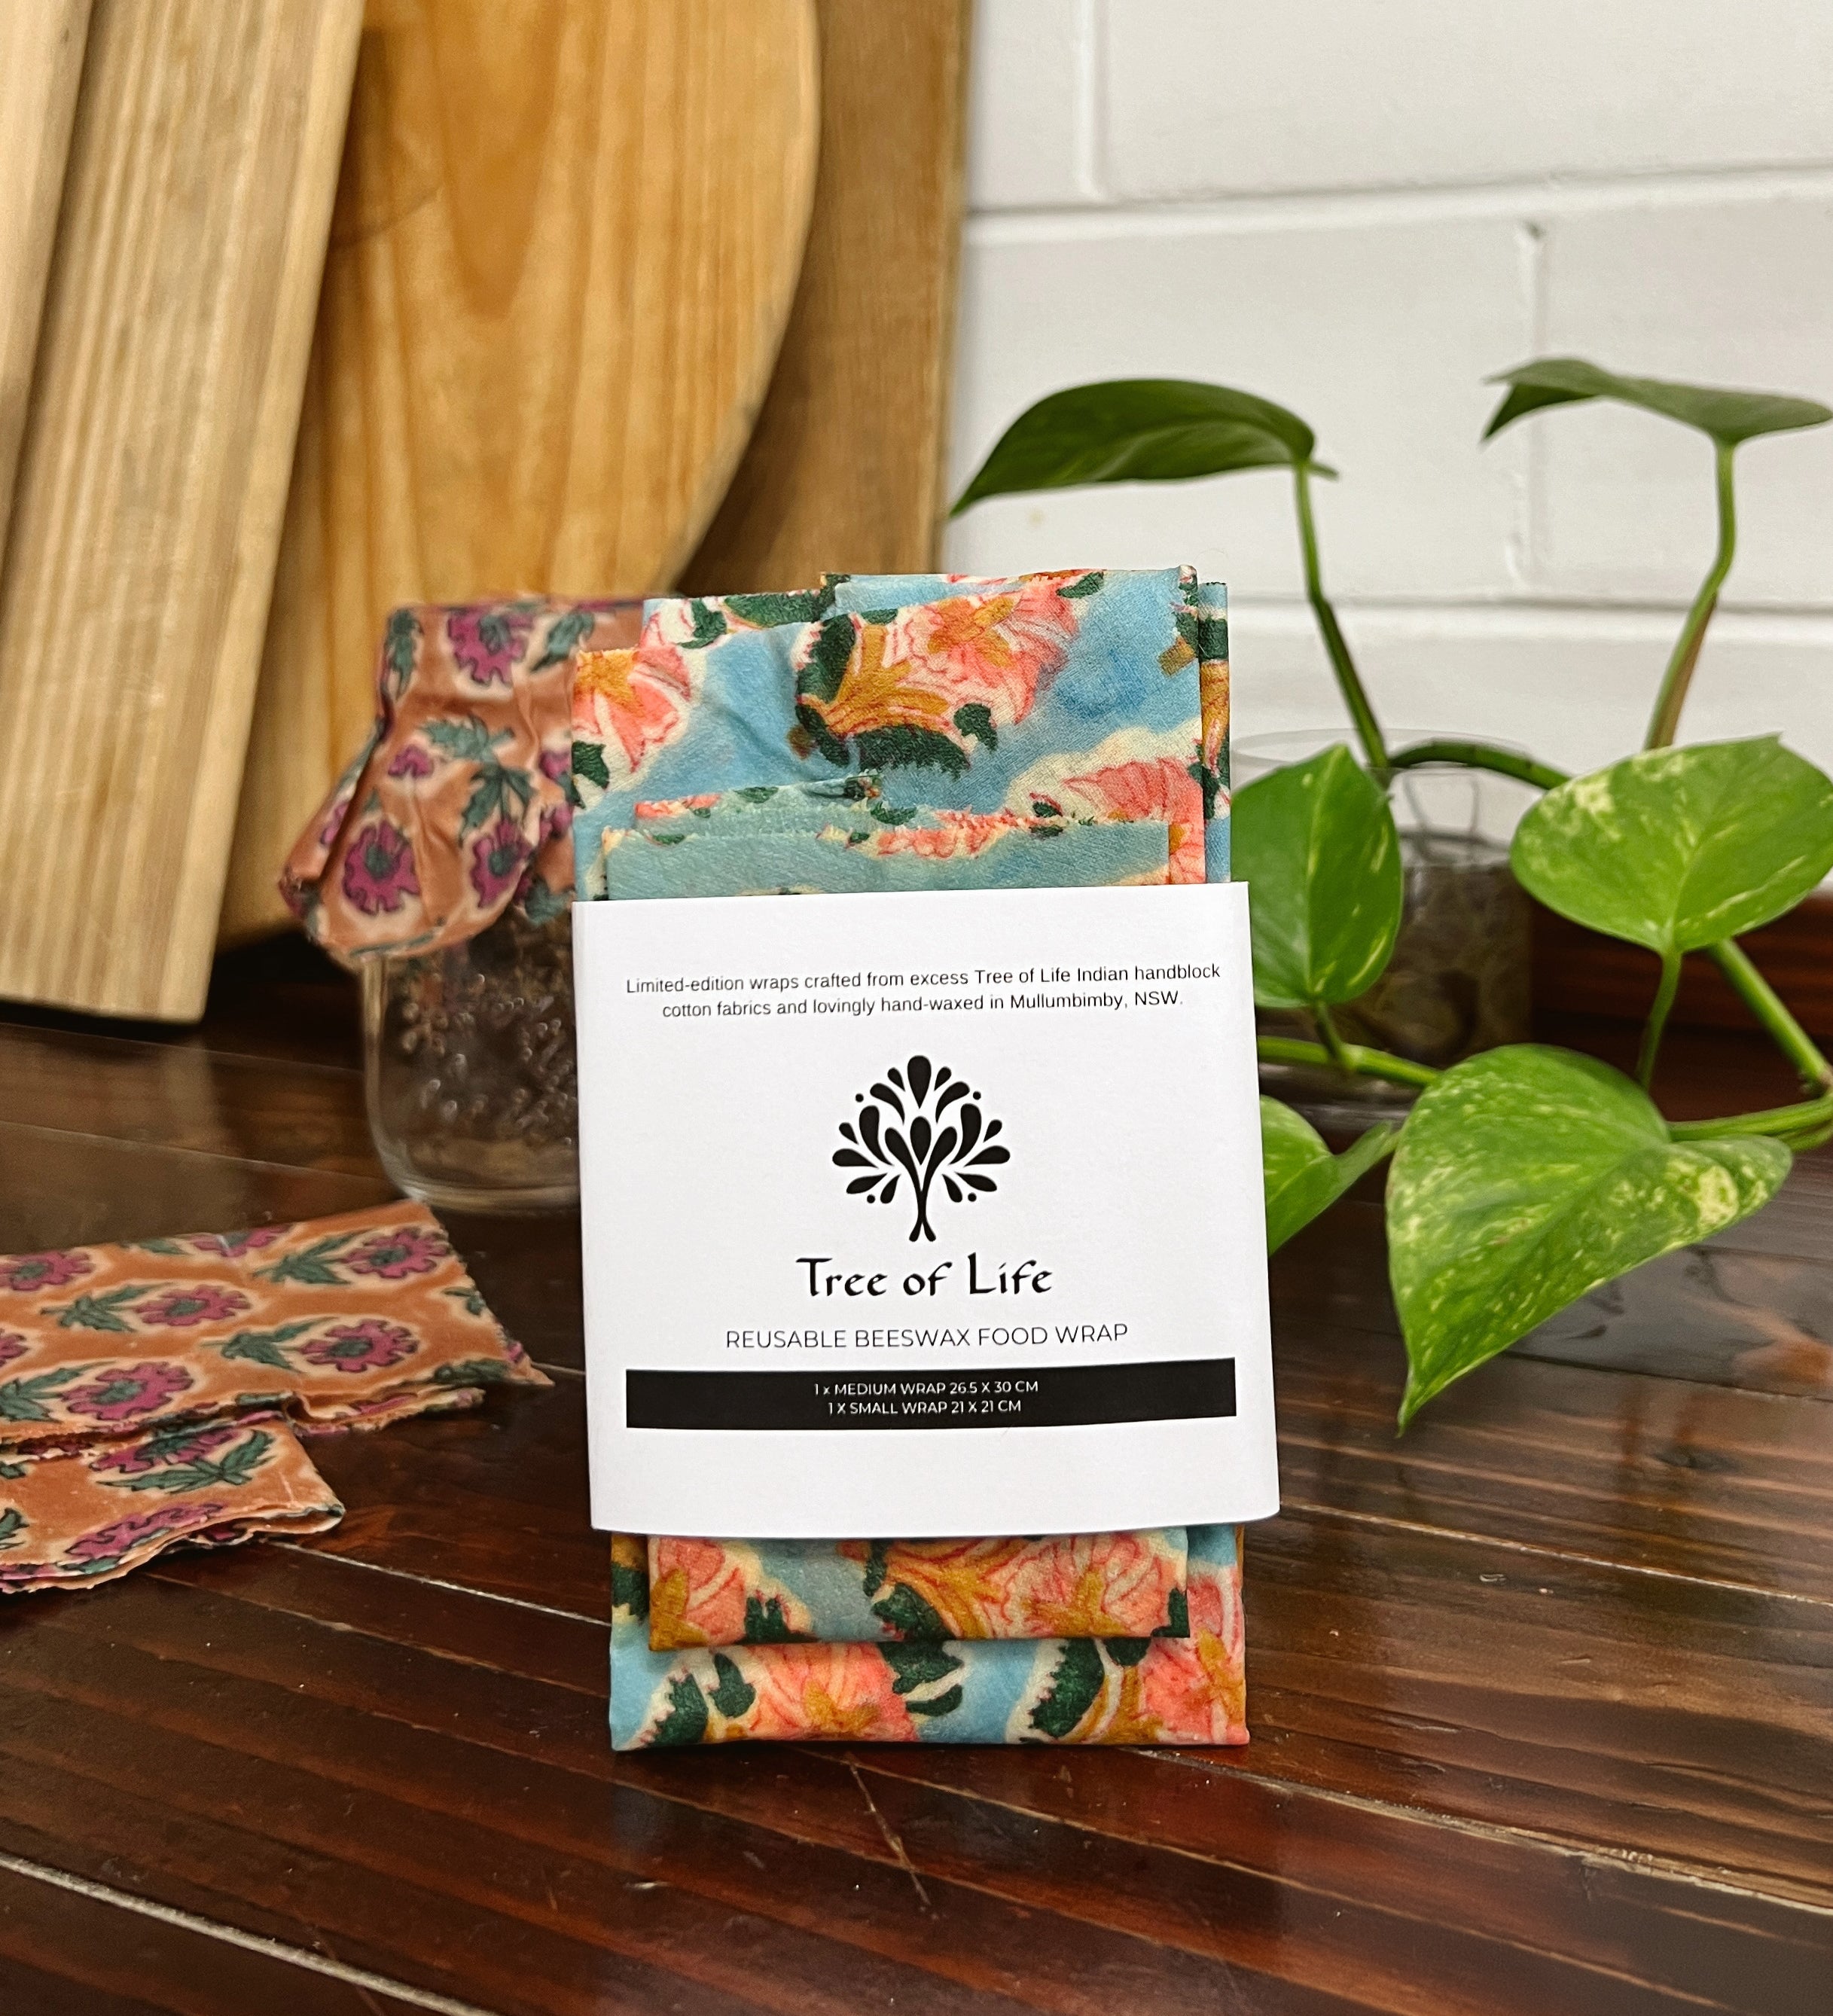 Introducing ~ Tree Of Life beeswax wraps 🐝✨